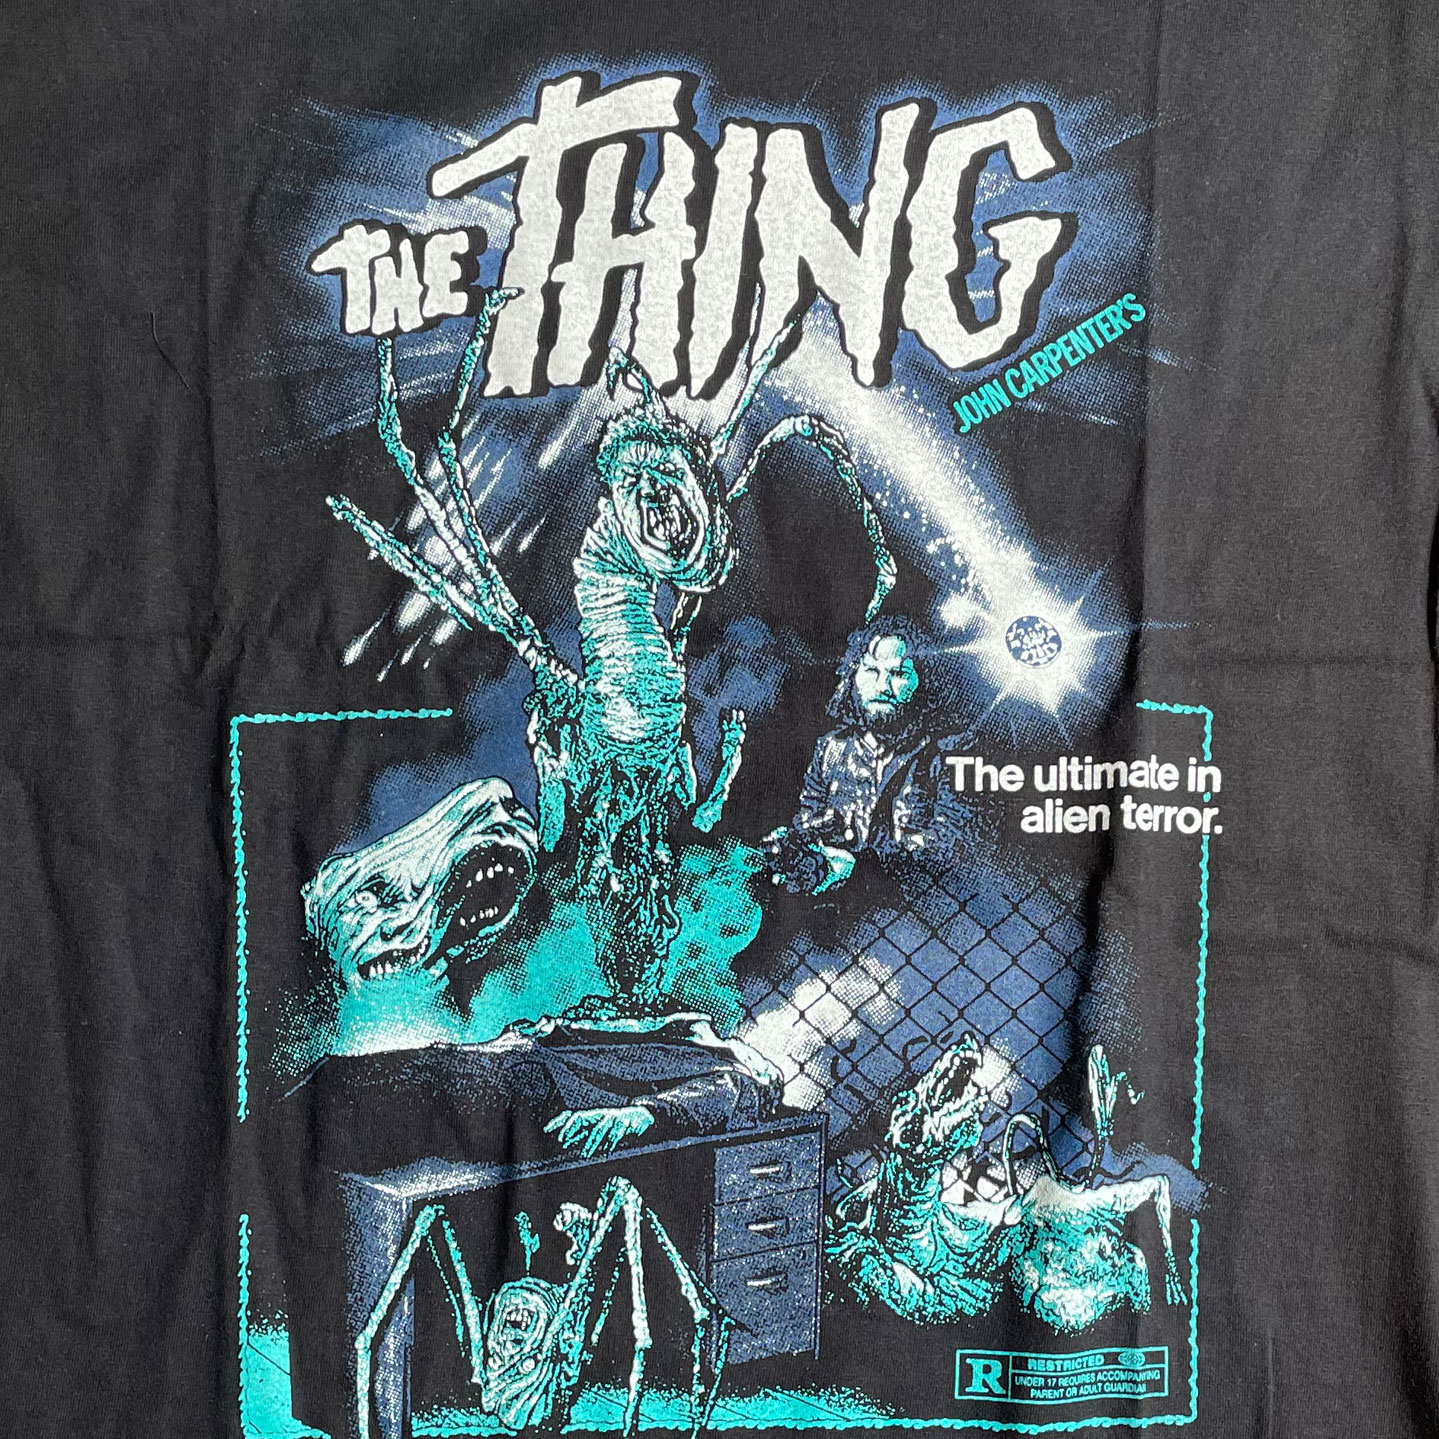 THE THING Tシャツ